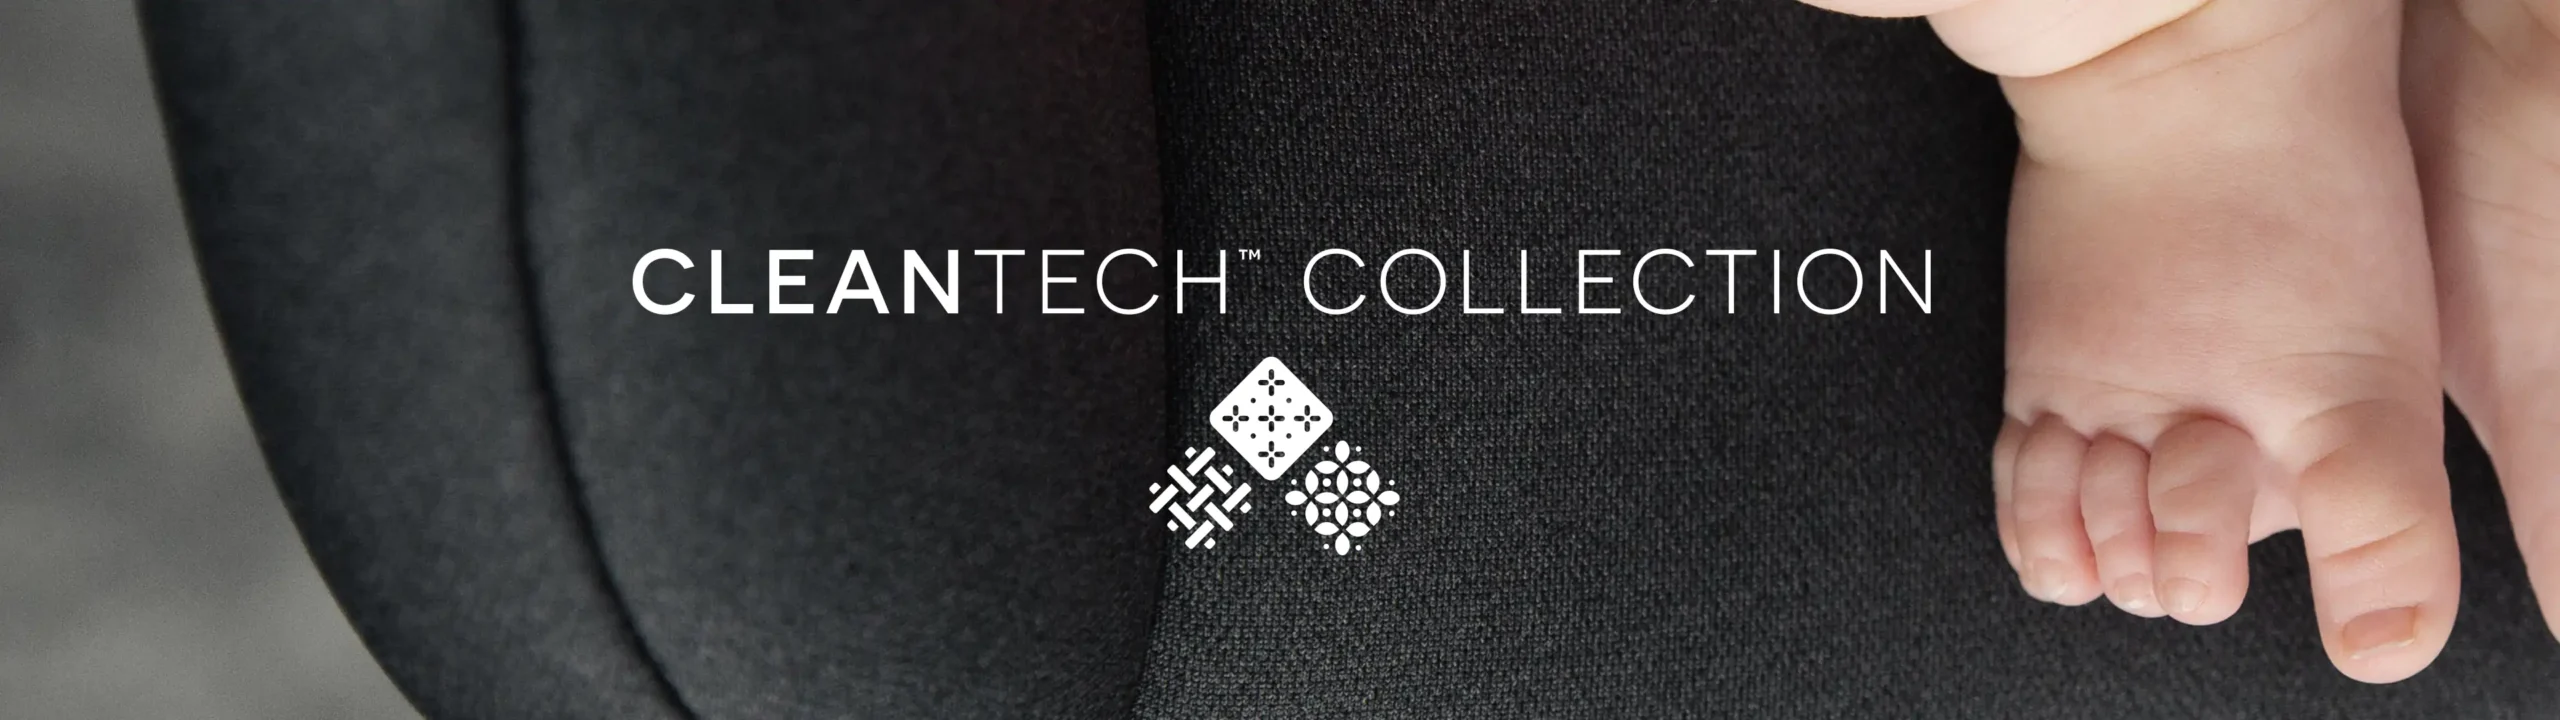 Cleantech Collection